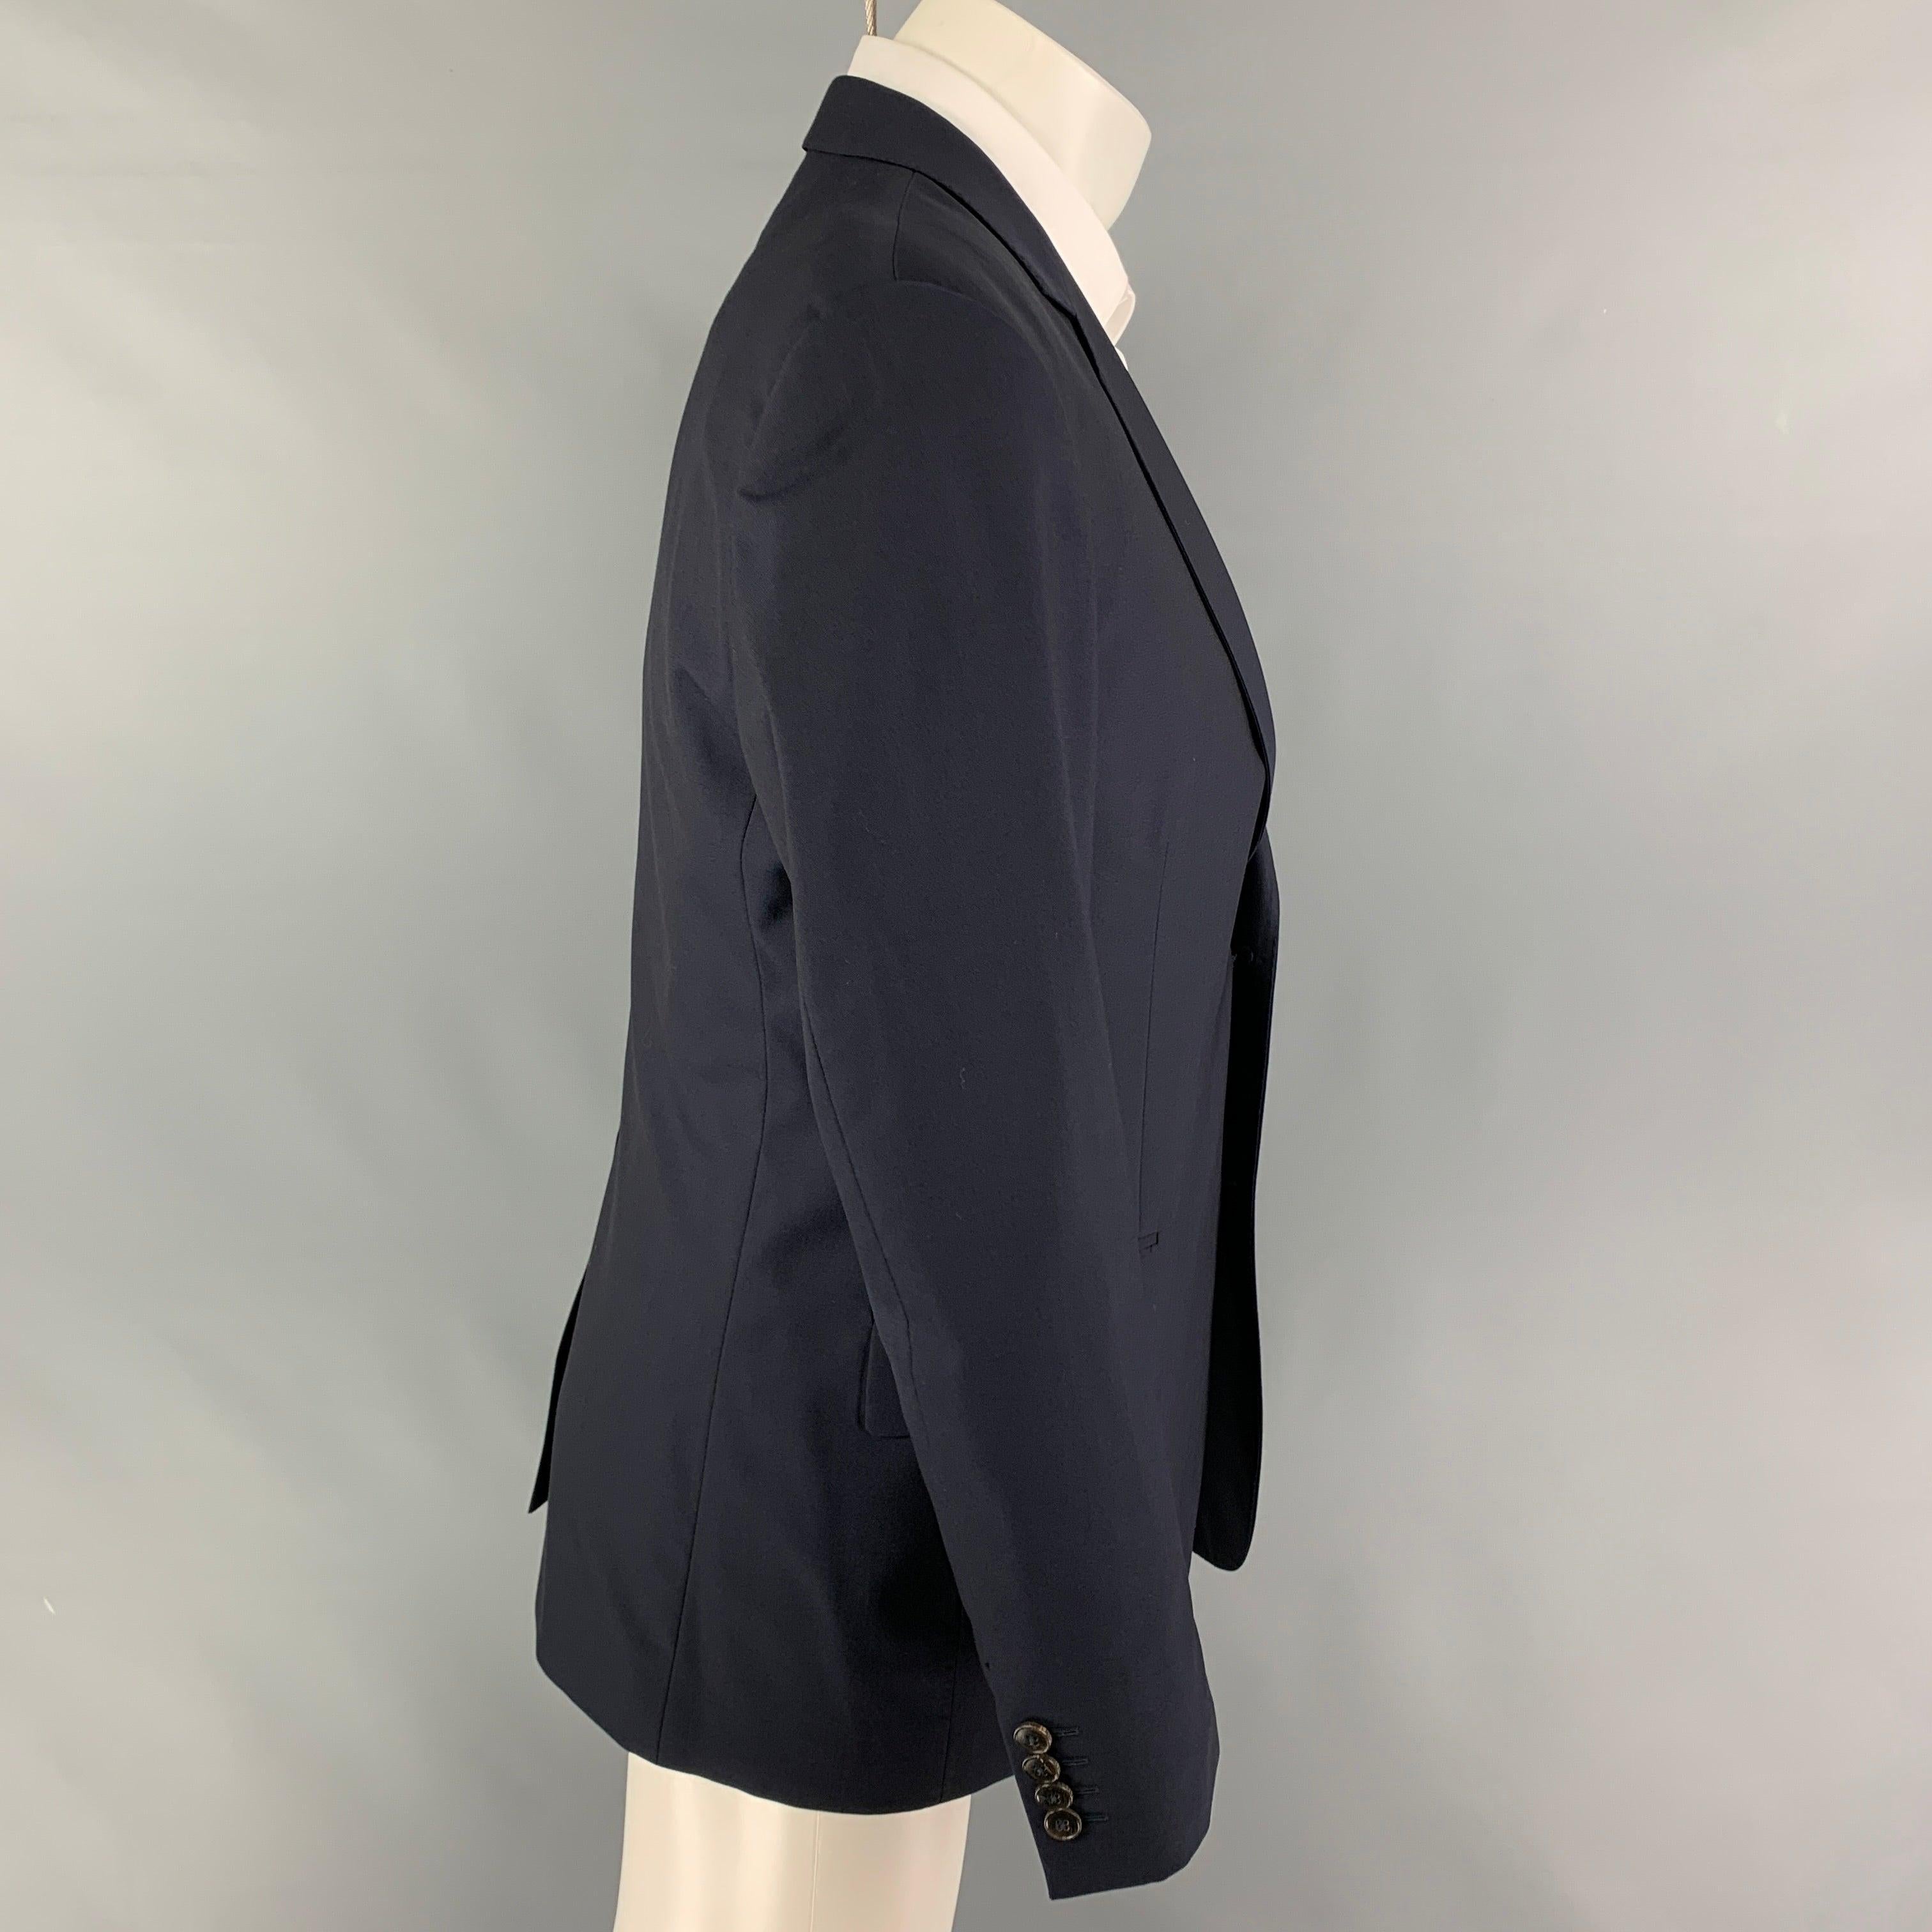 GUCCI sport coat comes in a navy wool with a full liner featuring a notch lapel, flap pockets, single back vent, and a double button closure. Made in Italy.
Very Good
Pre-Owned Condition.  

Marked:   50 R  

Measurements: 
 
Shoulder: 18 inches 